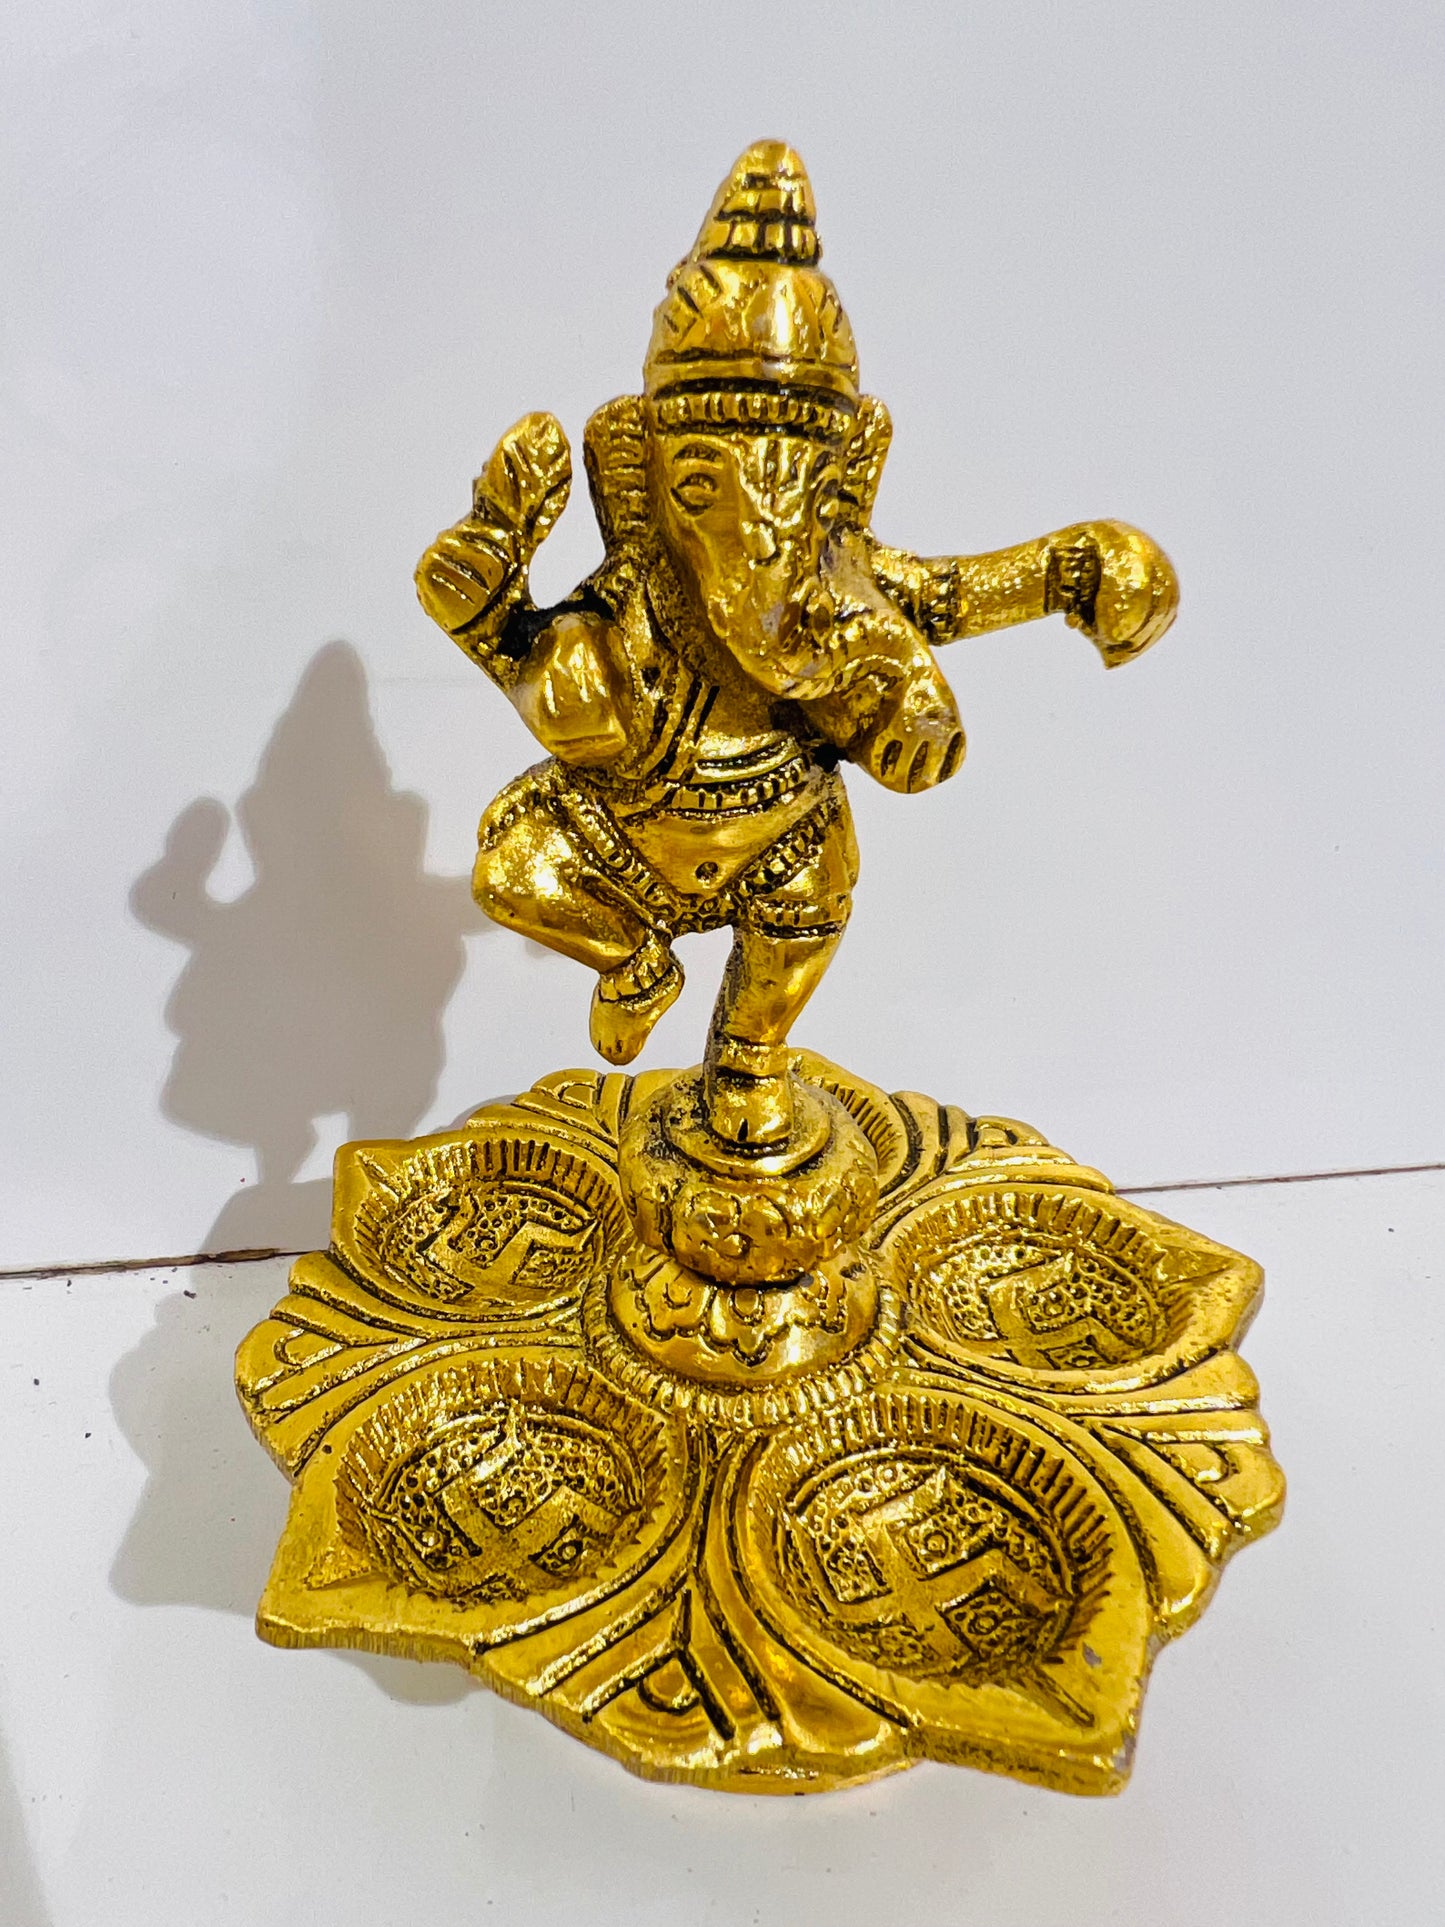 CHANDNI COLLECTION Metal Dancing Ganesh Diya with 5 Wick Holder with Stand for Pooja Room Diwali Home Decoration Antique Lord Ganesha Diya for Temple Oil Lamp Showpiece (Golden)